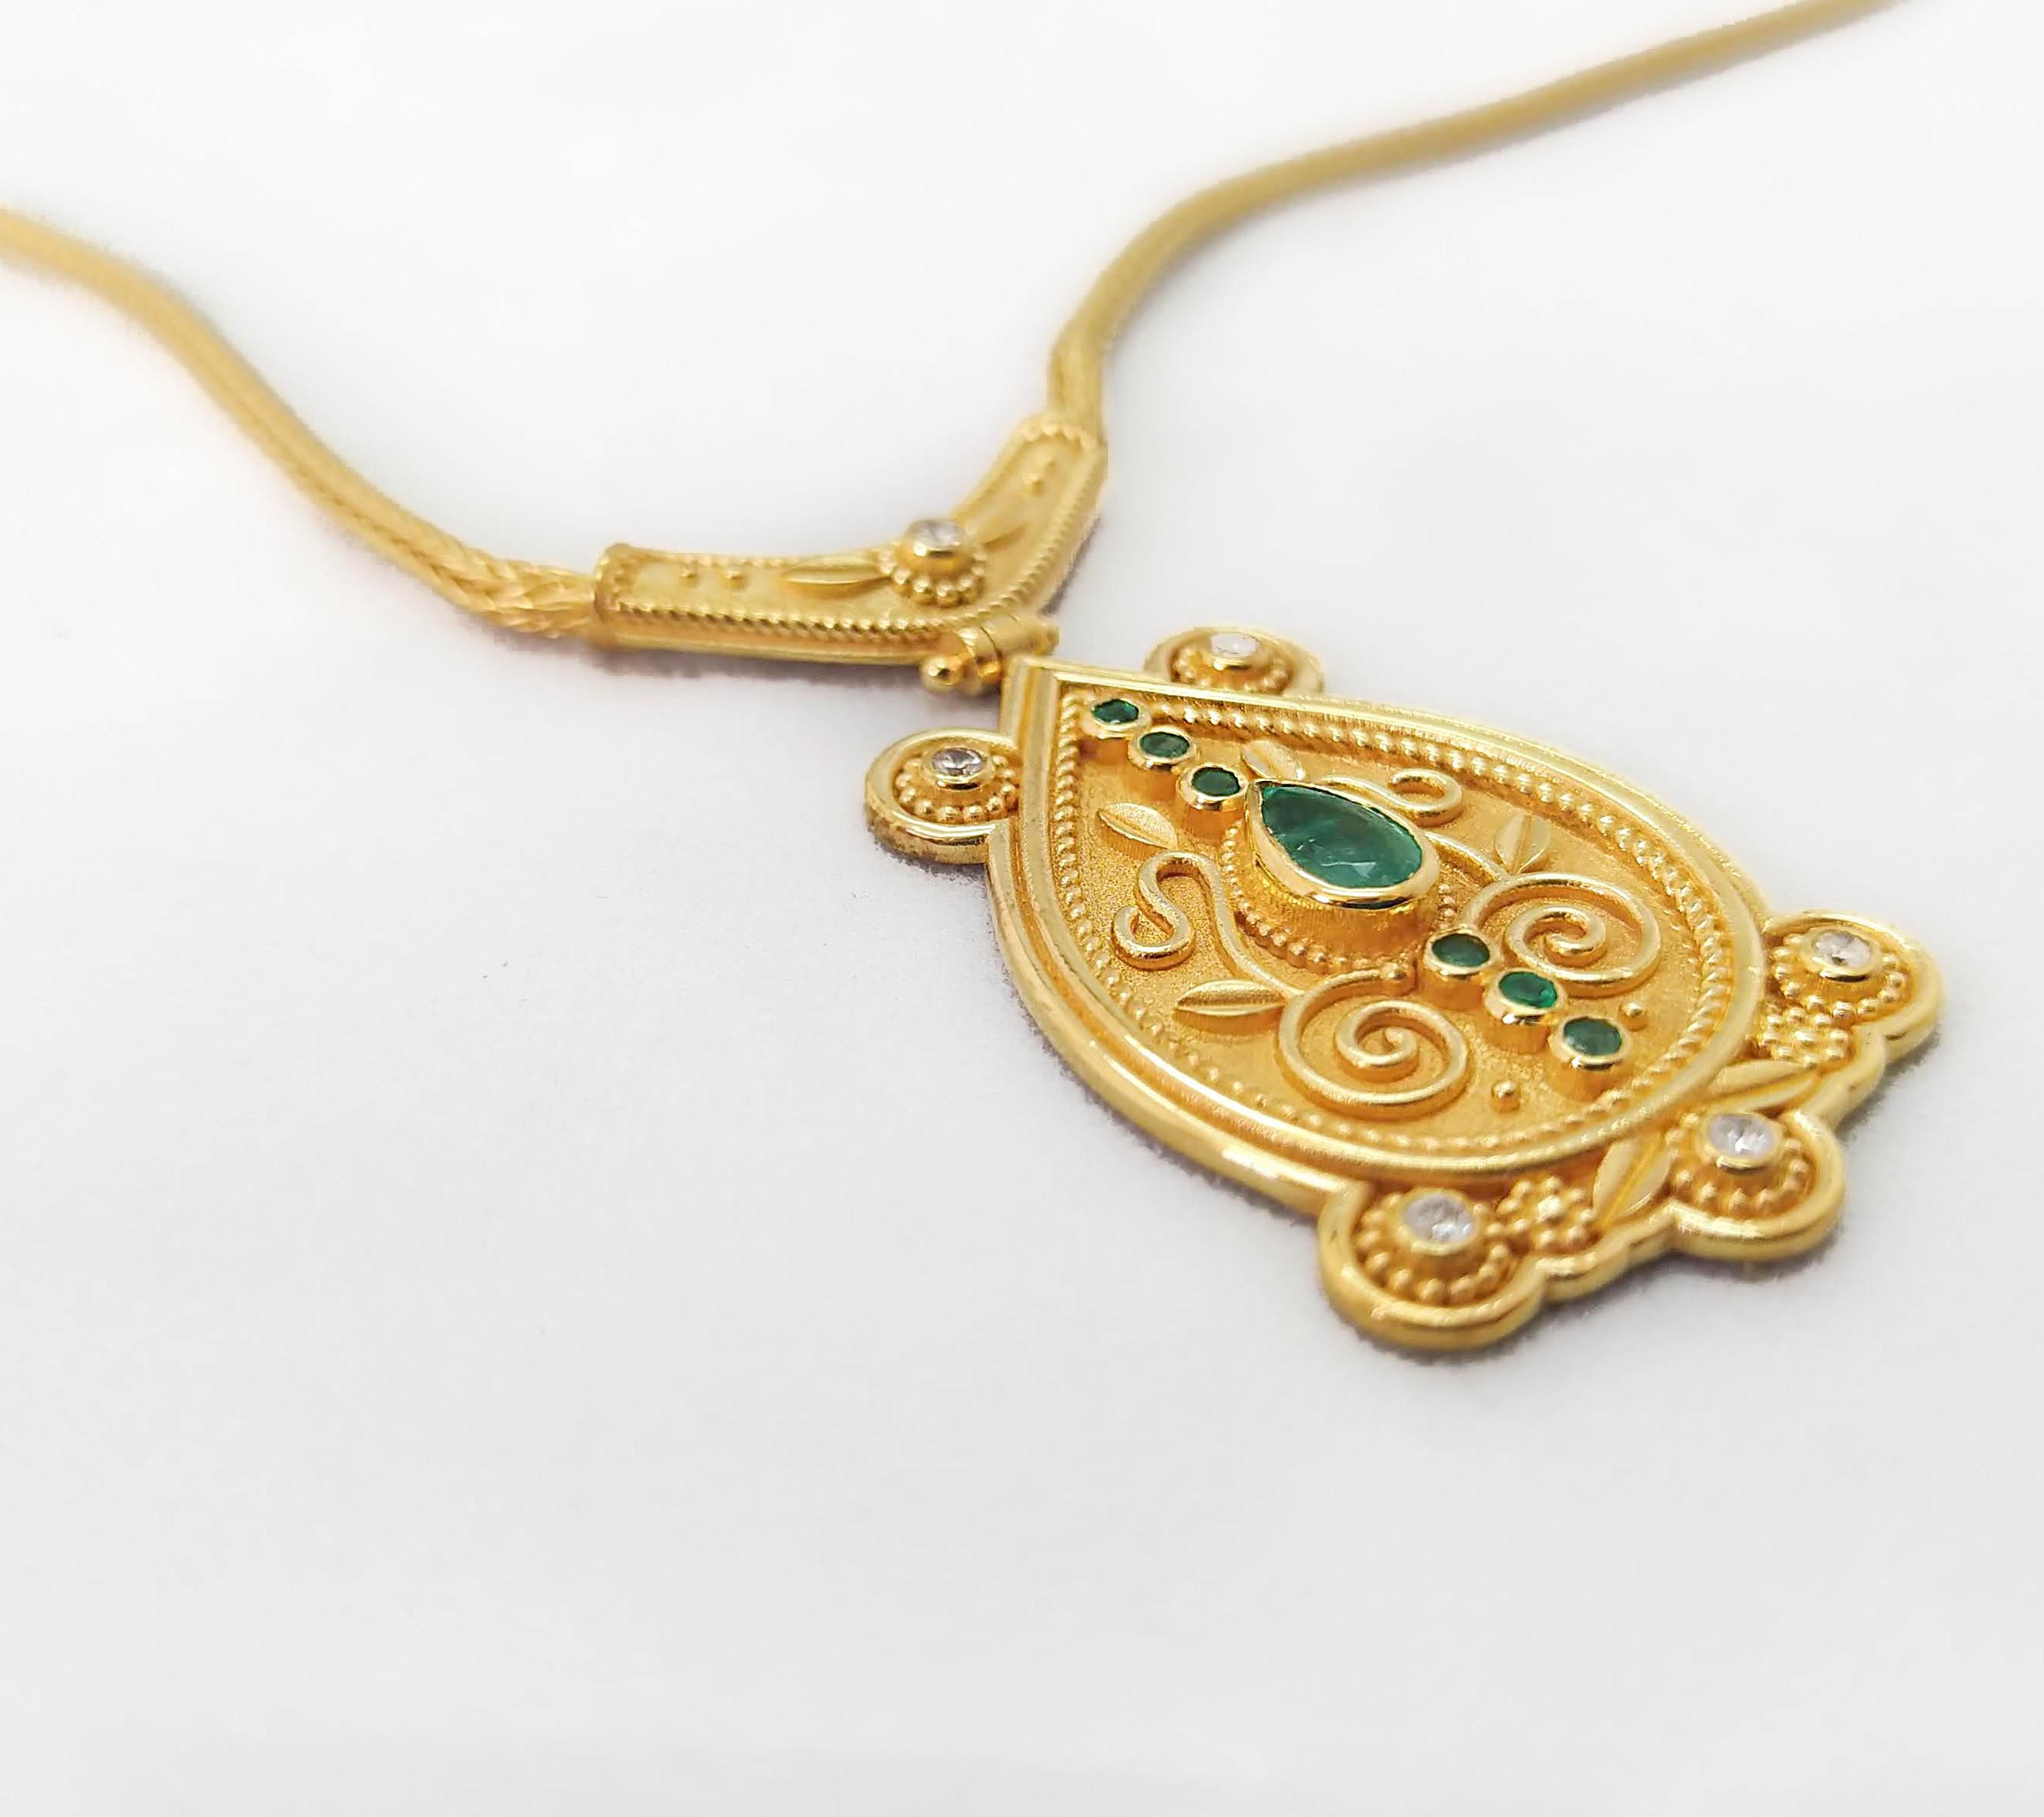 This S.Georgios designer 18 Karat Yellow Gold drop pendant Necklace is microscopically decorated with Byzantine-style bead and wire granulation workmanship and finished with a unique velvet background look. This gorgeous pendant necklace showcases a